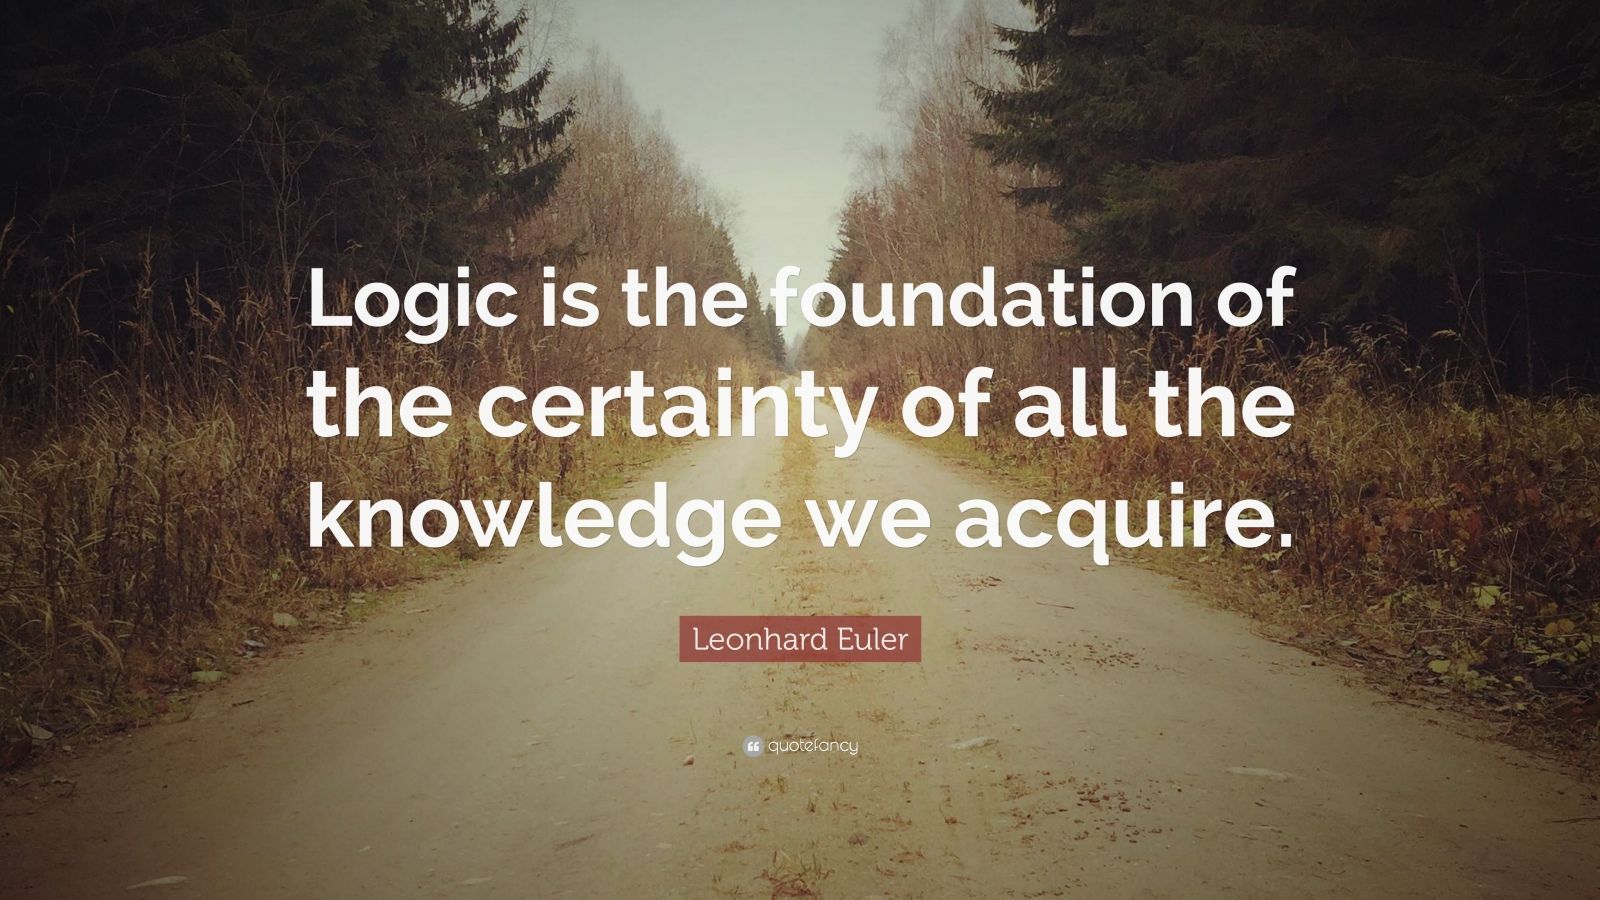 Leonhard Euler Quote: “Logic is the foundation of the certainty of all the knowledge we acquire.” (7 wallpaper)